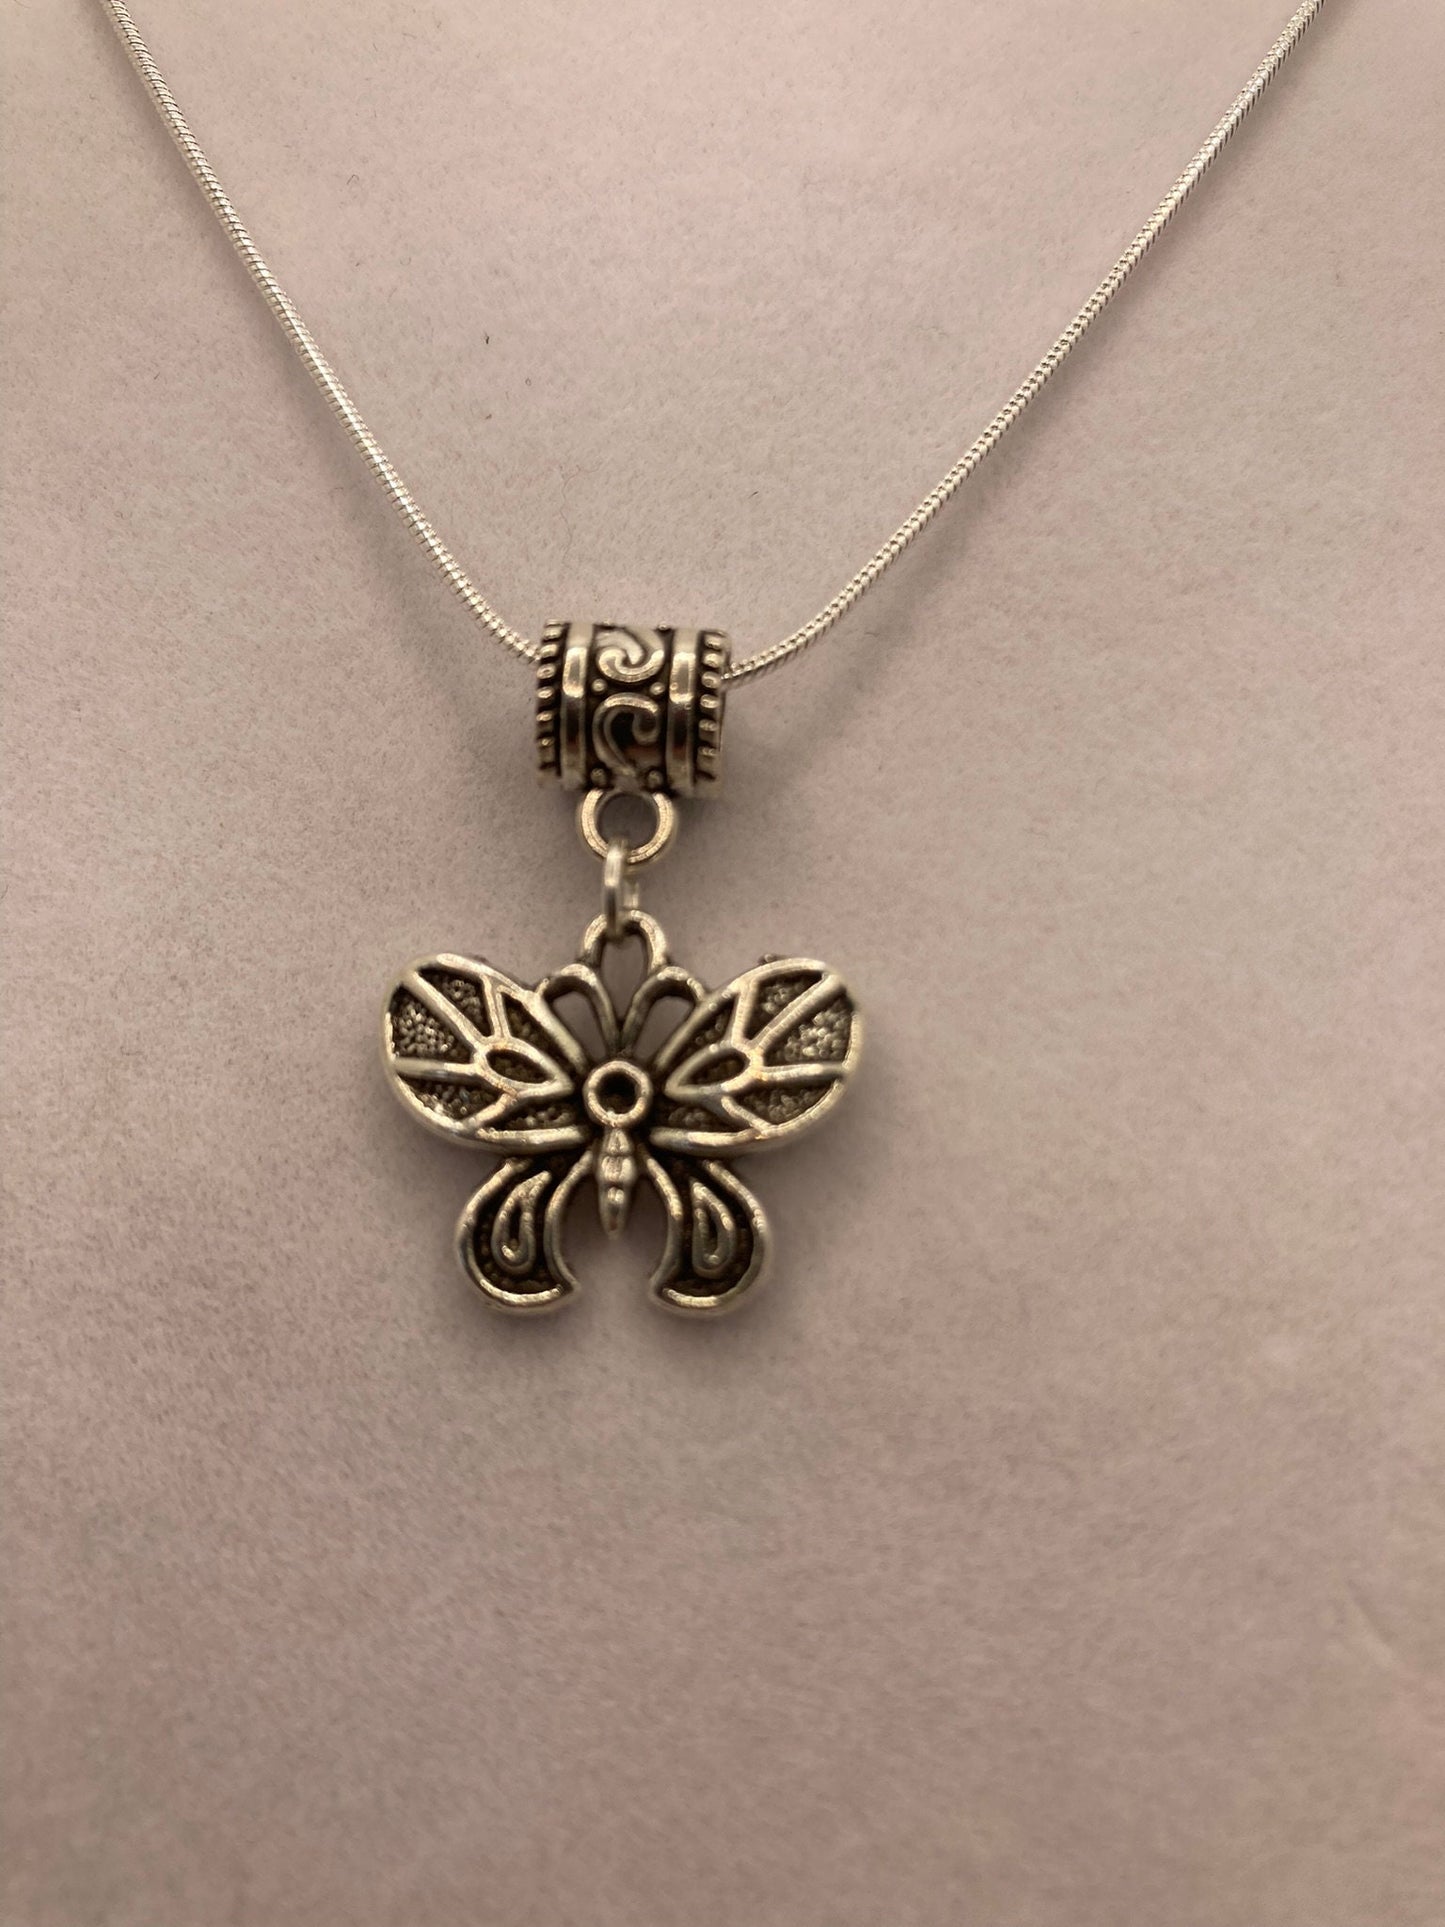 Butterfly Necklace with Specialty Chain, Southwest, Religious and Country Jewelry